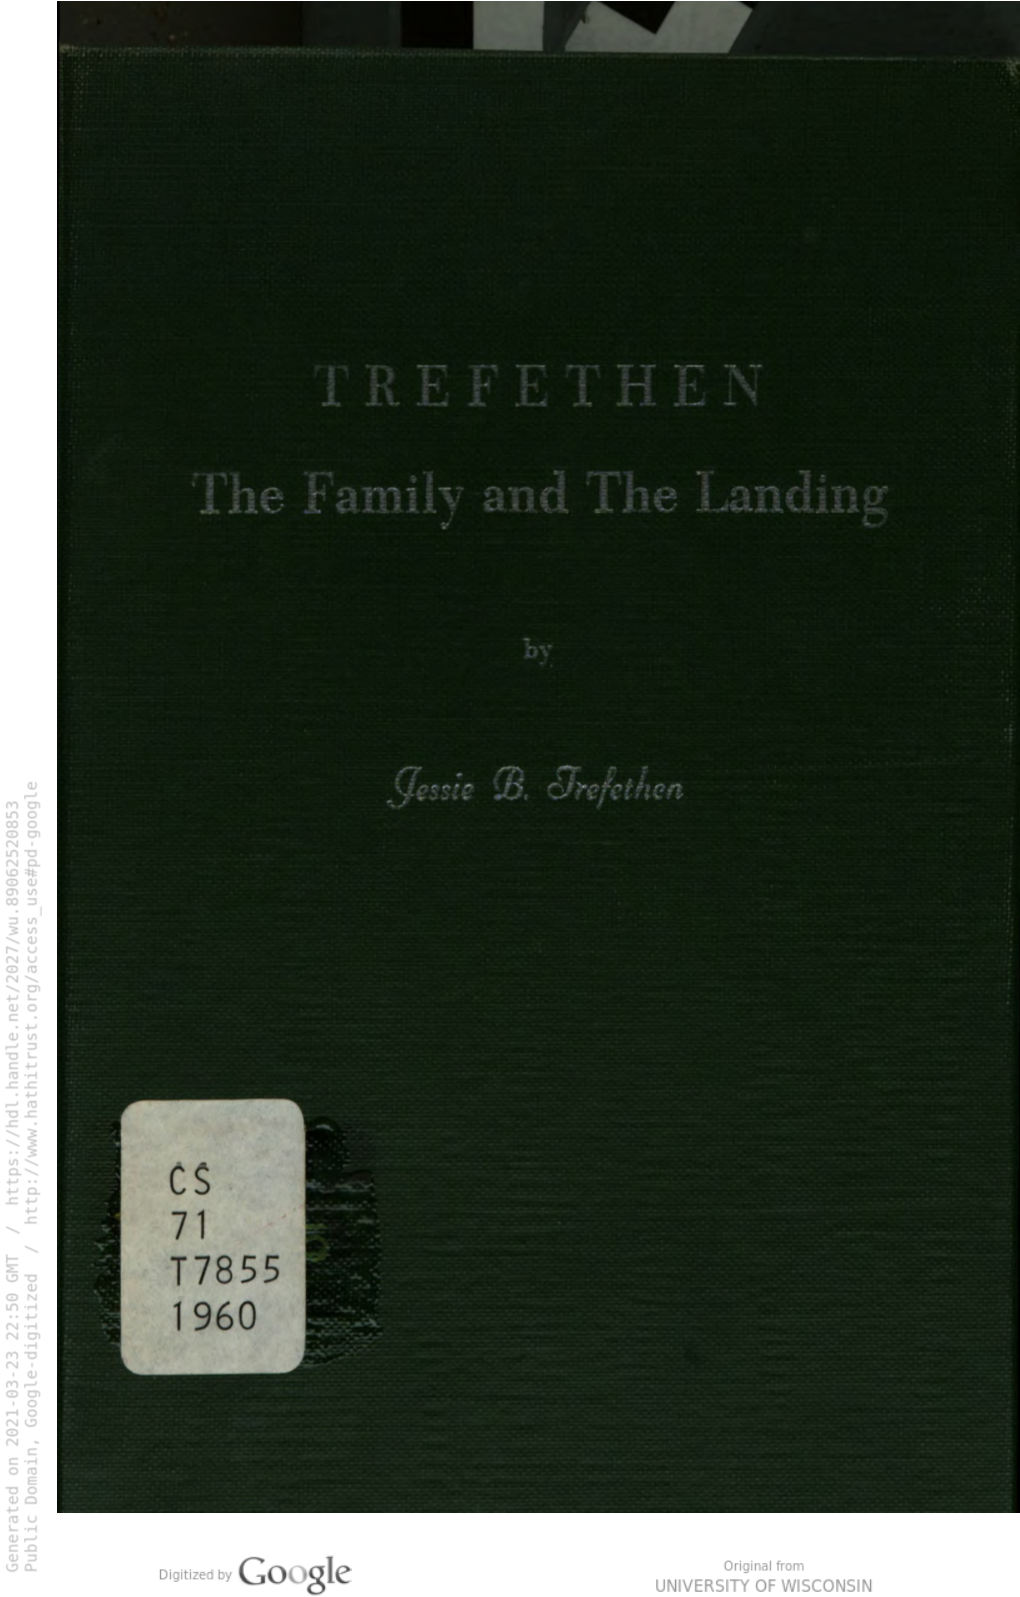 Trefethen: the Family and the Landing